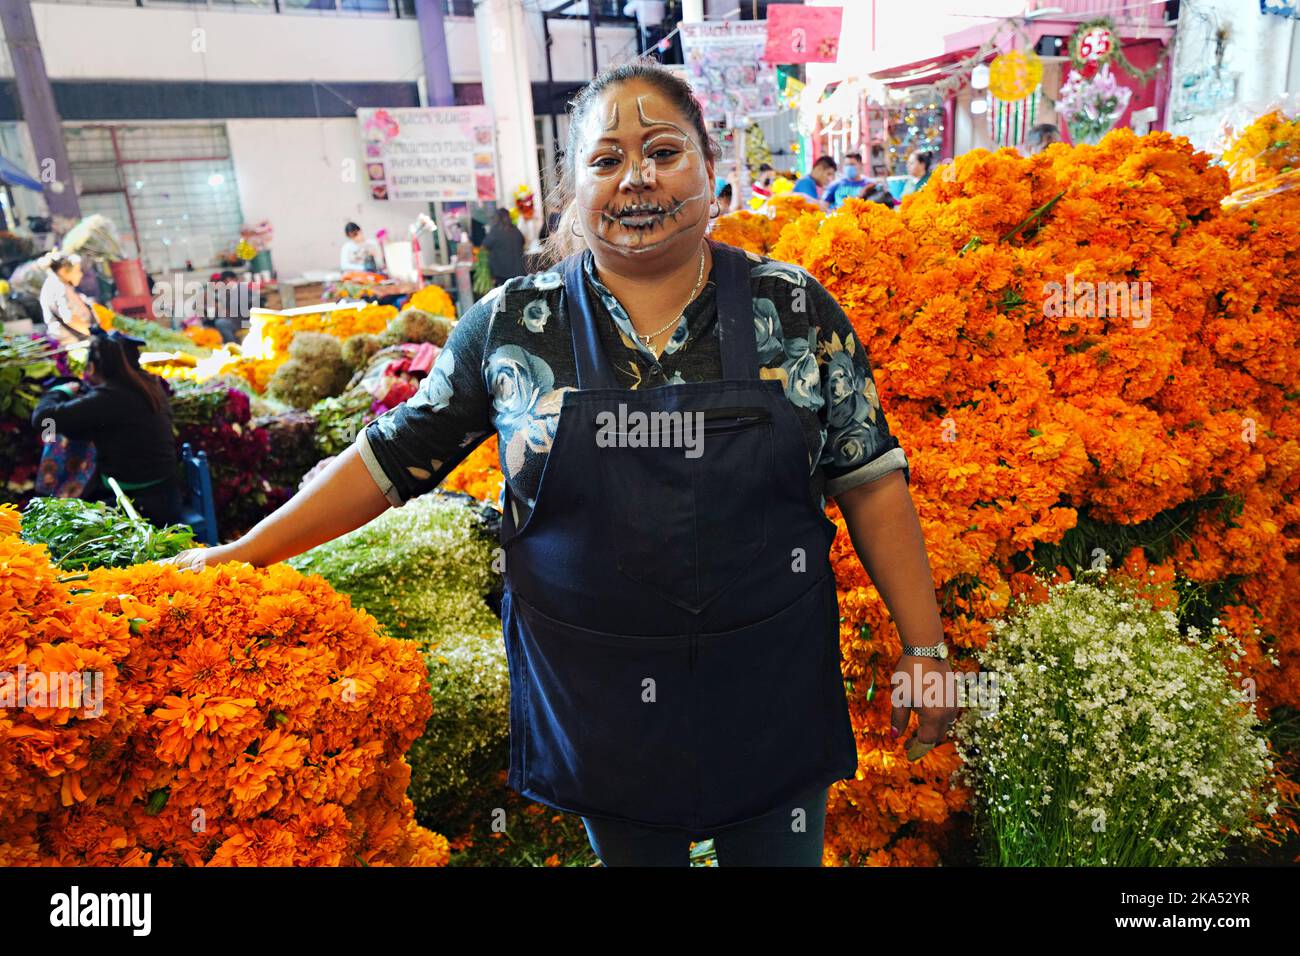 Mexico City, Mexico. 31st Oct, 2022. A vendor wearing face paint stands with her pile of cempasuchil flowers, the traditional Day of the Dead flower used to decorate altars and gravesites during the annual festival at the Jamaica Flower Market, October 31, 2022 in Mexico City, Mexico. Credit: Richard Ellis/Richard Ellis/Alamy Live News Stock Photo